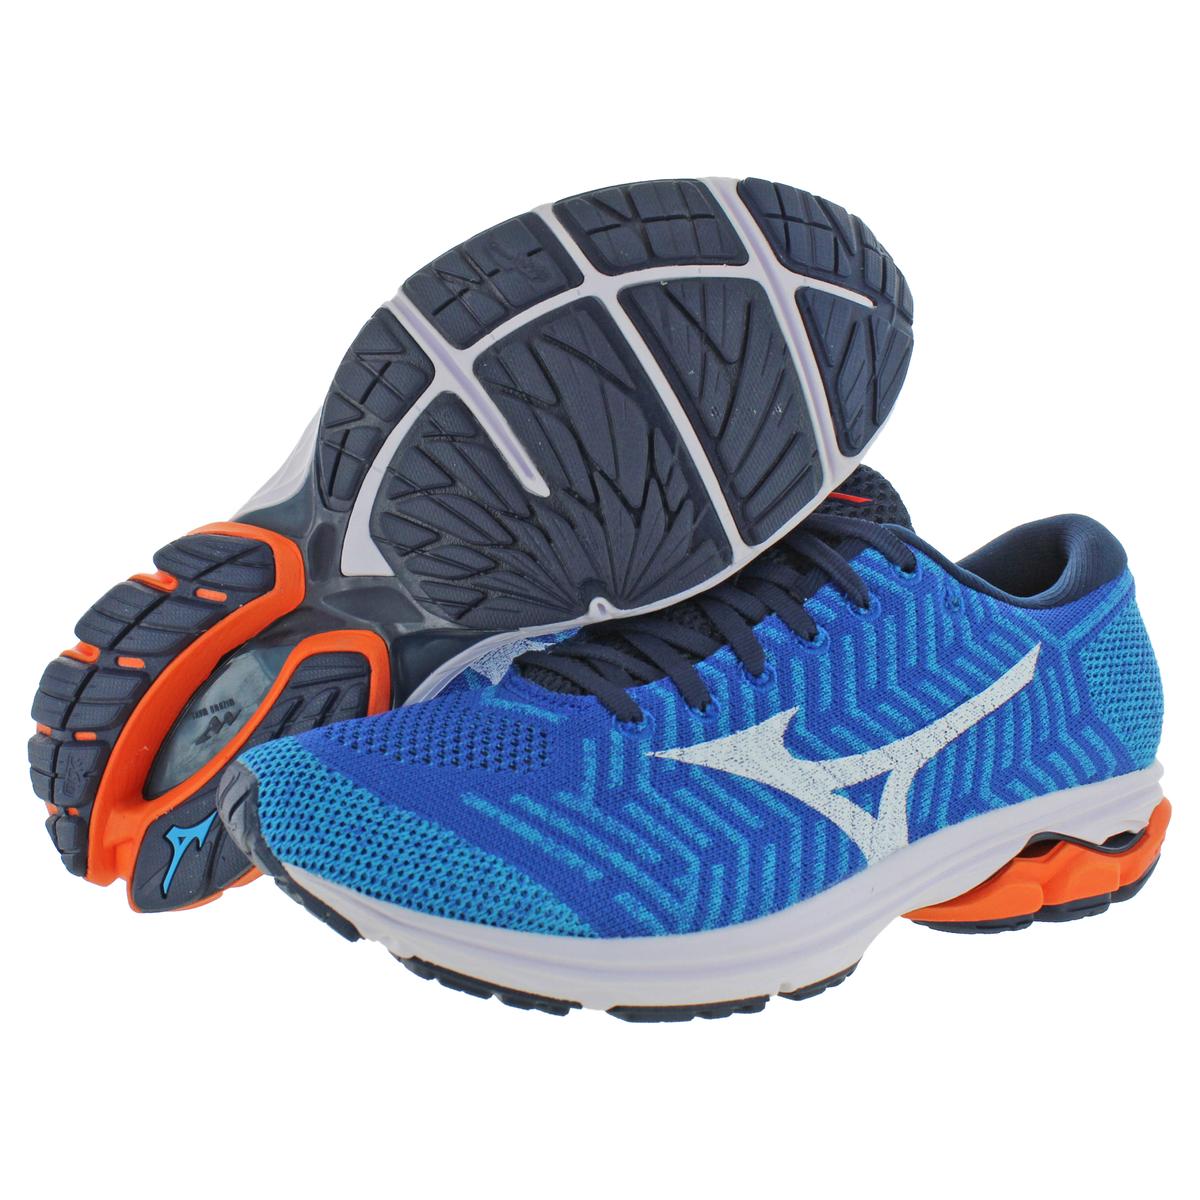 Mizuno Mens Waveknit R2 Lifestyle Exercise Running Shoes Sneakers BHFO ...